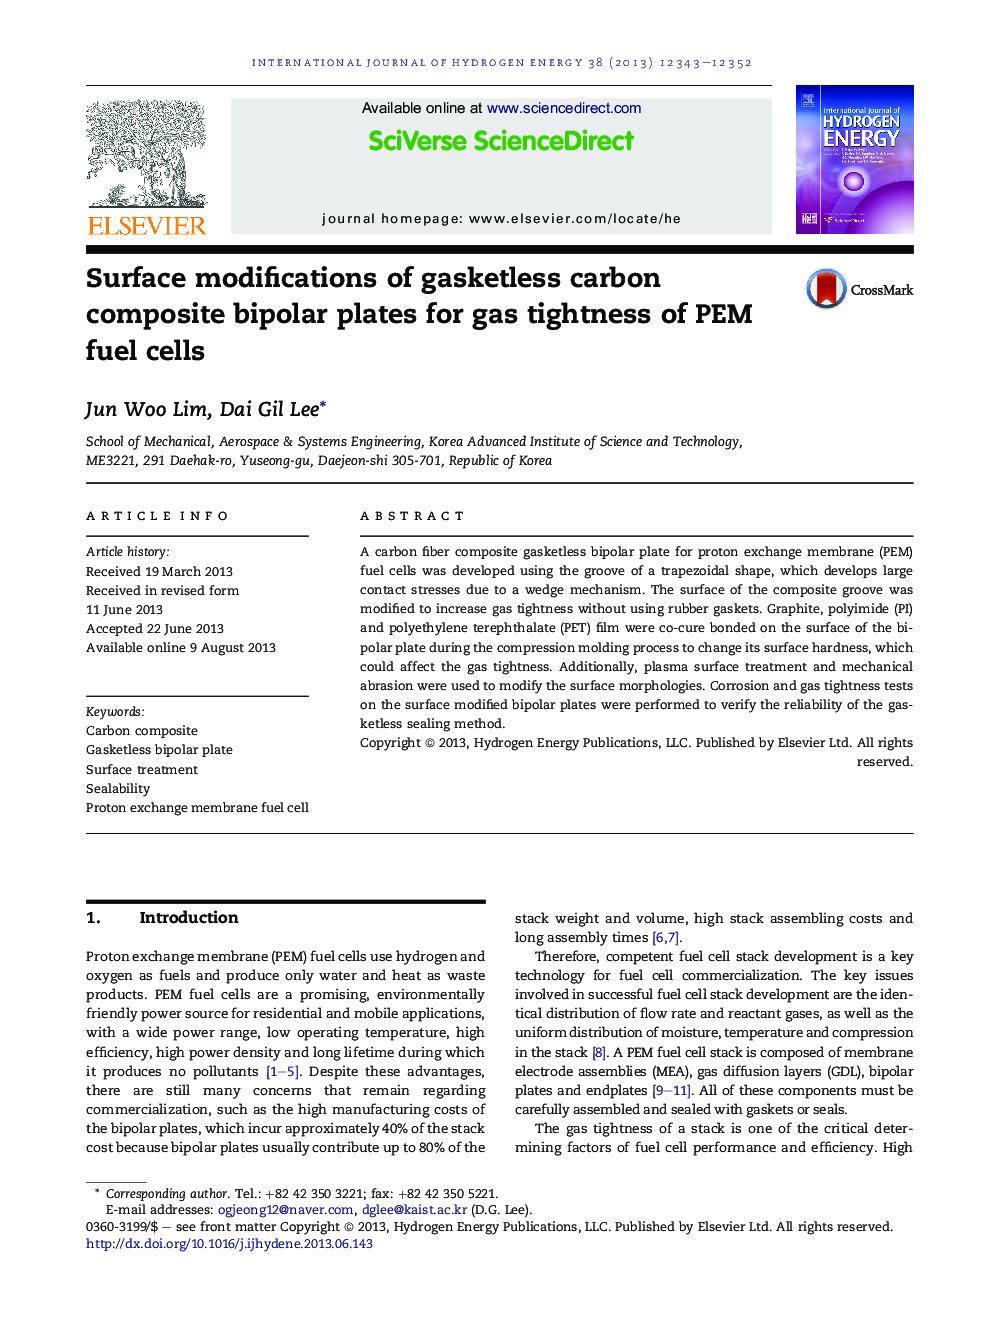 Surface modifications of gasketless carbon composite bipolar plates for gas tightness of PEM fuel cells